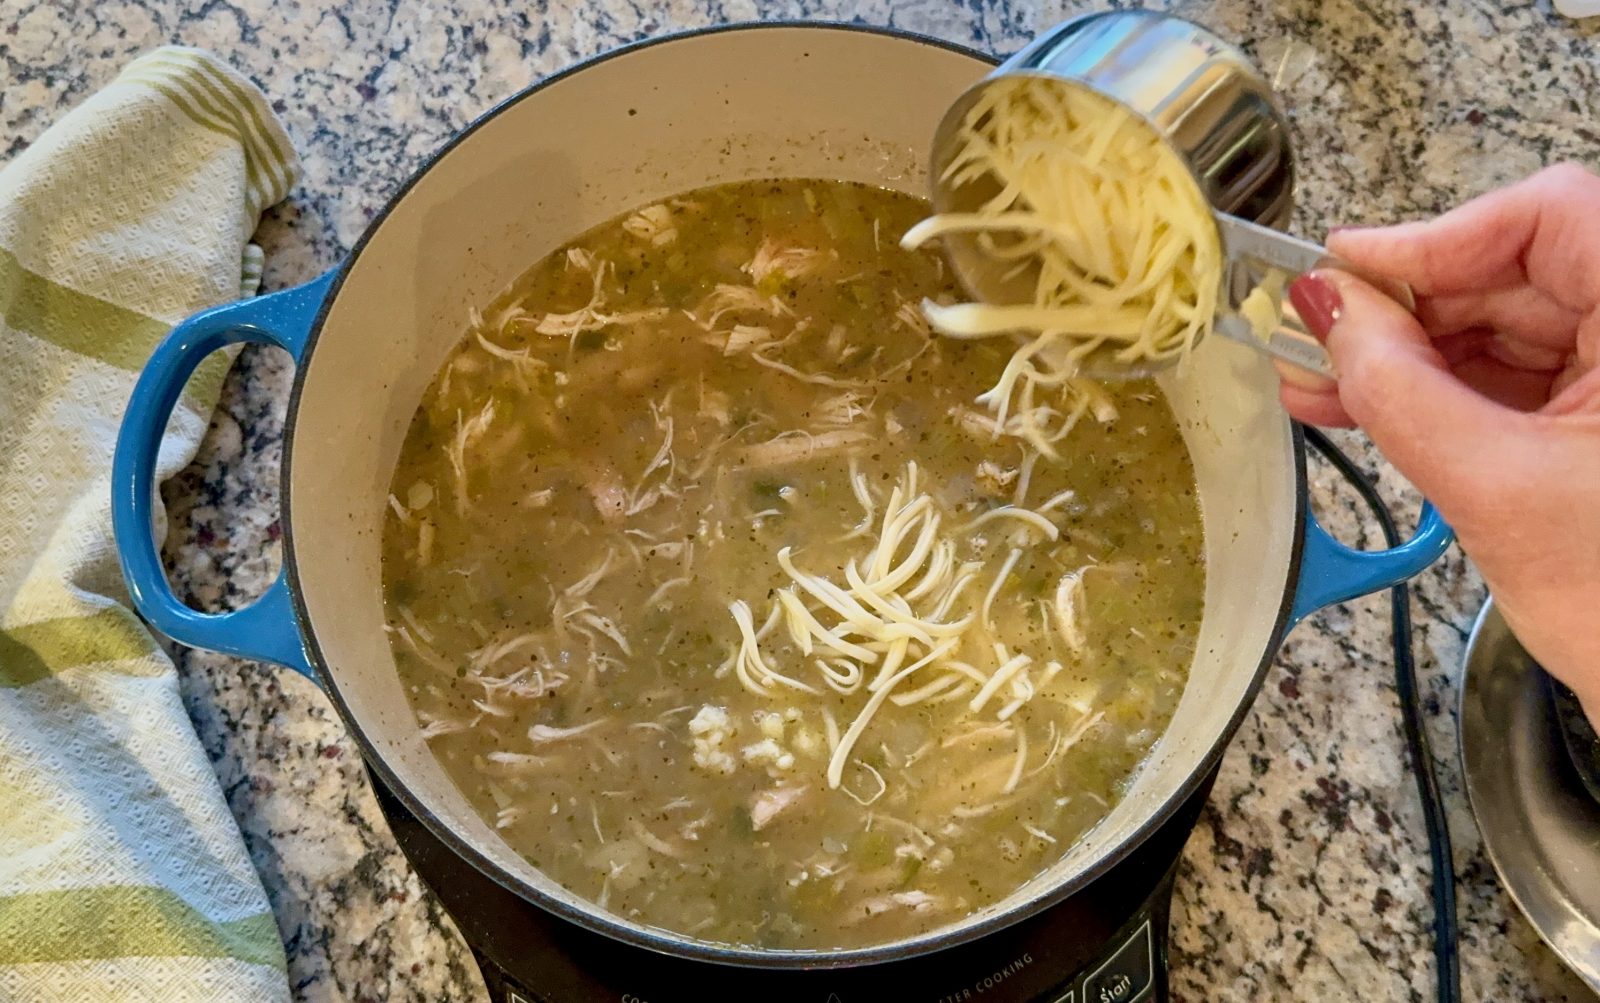 Recipe Photo of White chicken chili.  Blue Le Creuset pot with simmering white chicken chili in it.  Adding shredded Monterey jack cheese from 1 cup stainless steel measuring cup.  